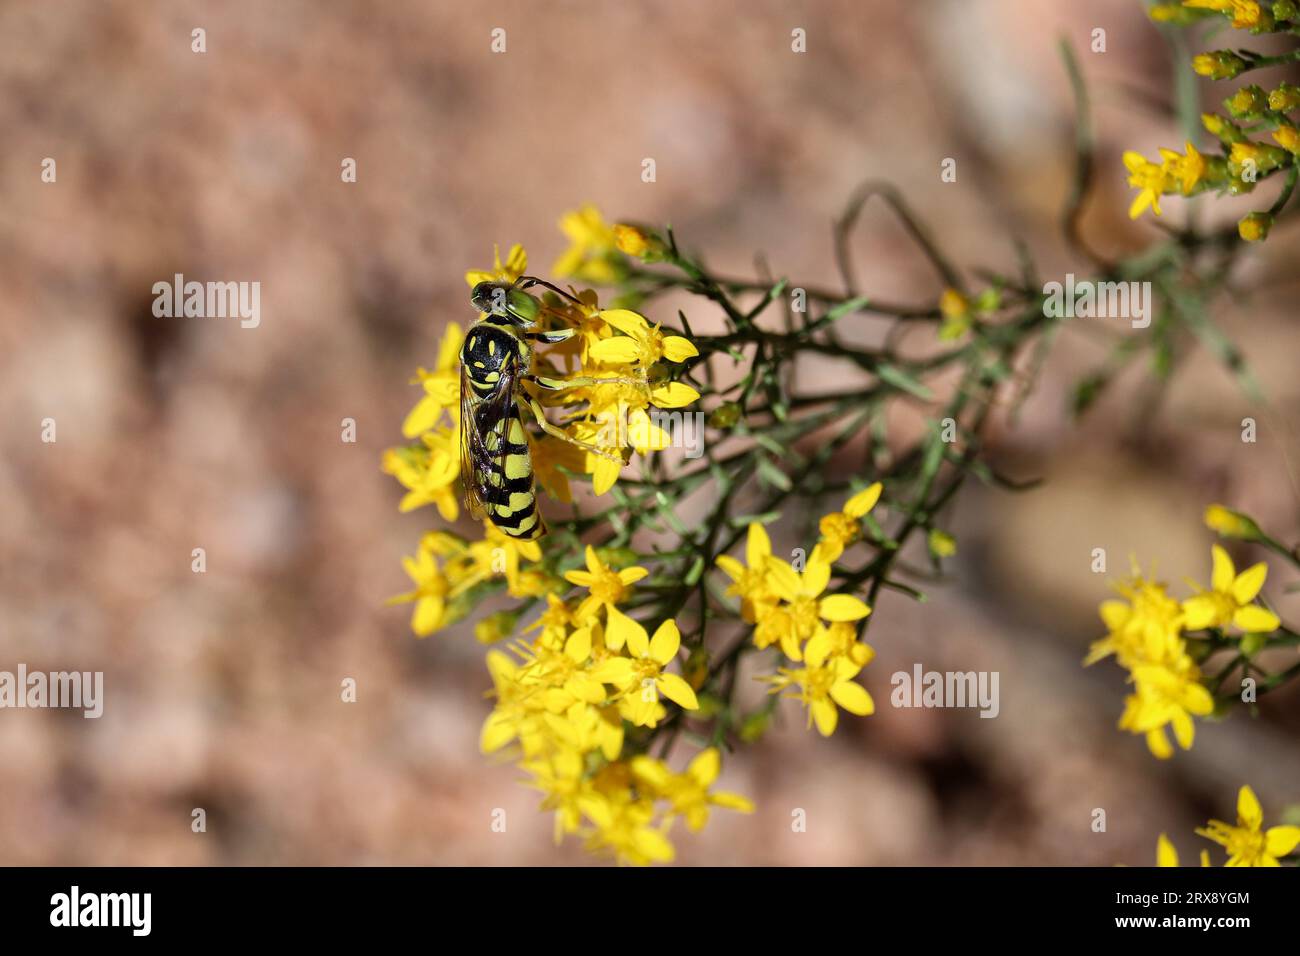 Sand wasp or Steniolia feeding on goldenrod flowers at Rumsey Park in Payson, Arizona. Stock Photo